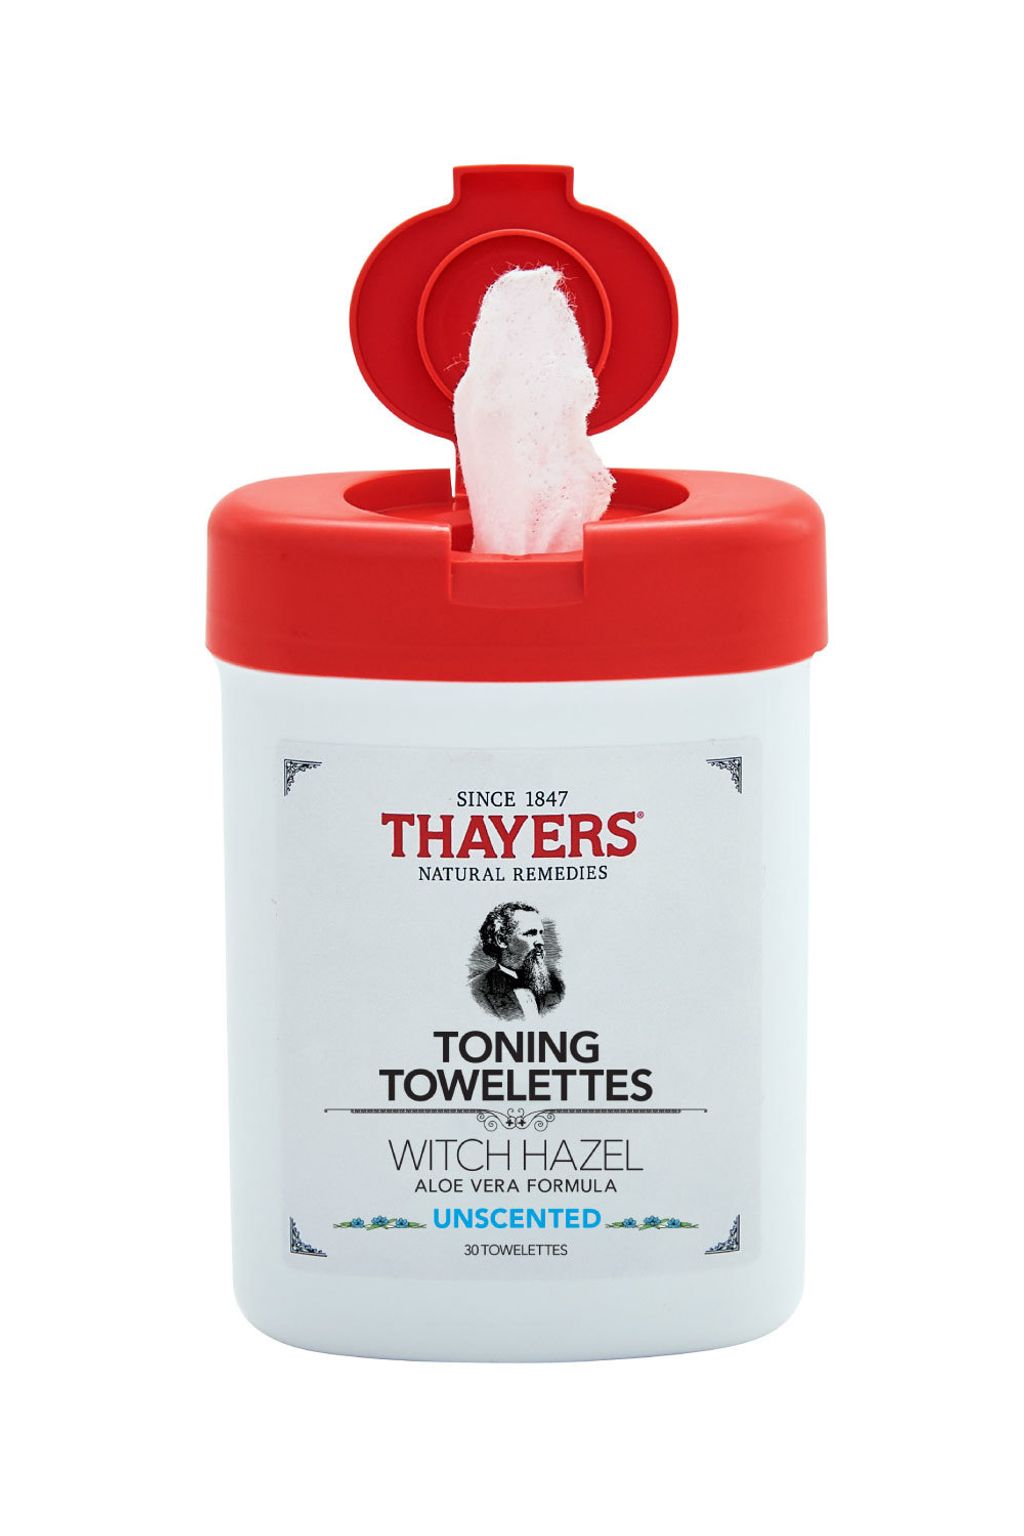 Thayers, Unscented Toning Towelettes, 30 Towelettes_1.jpg